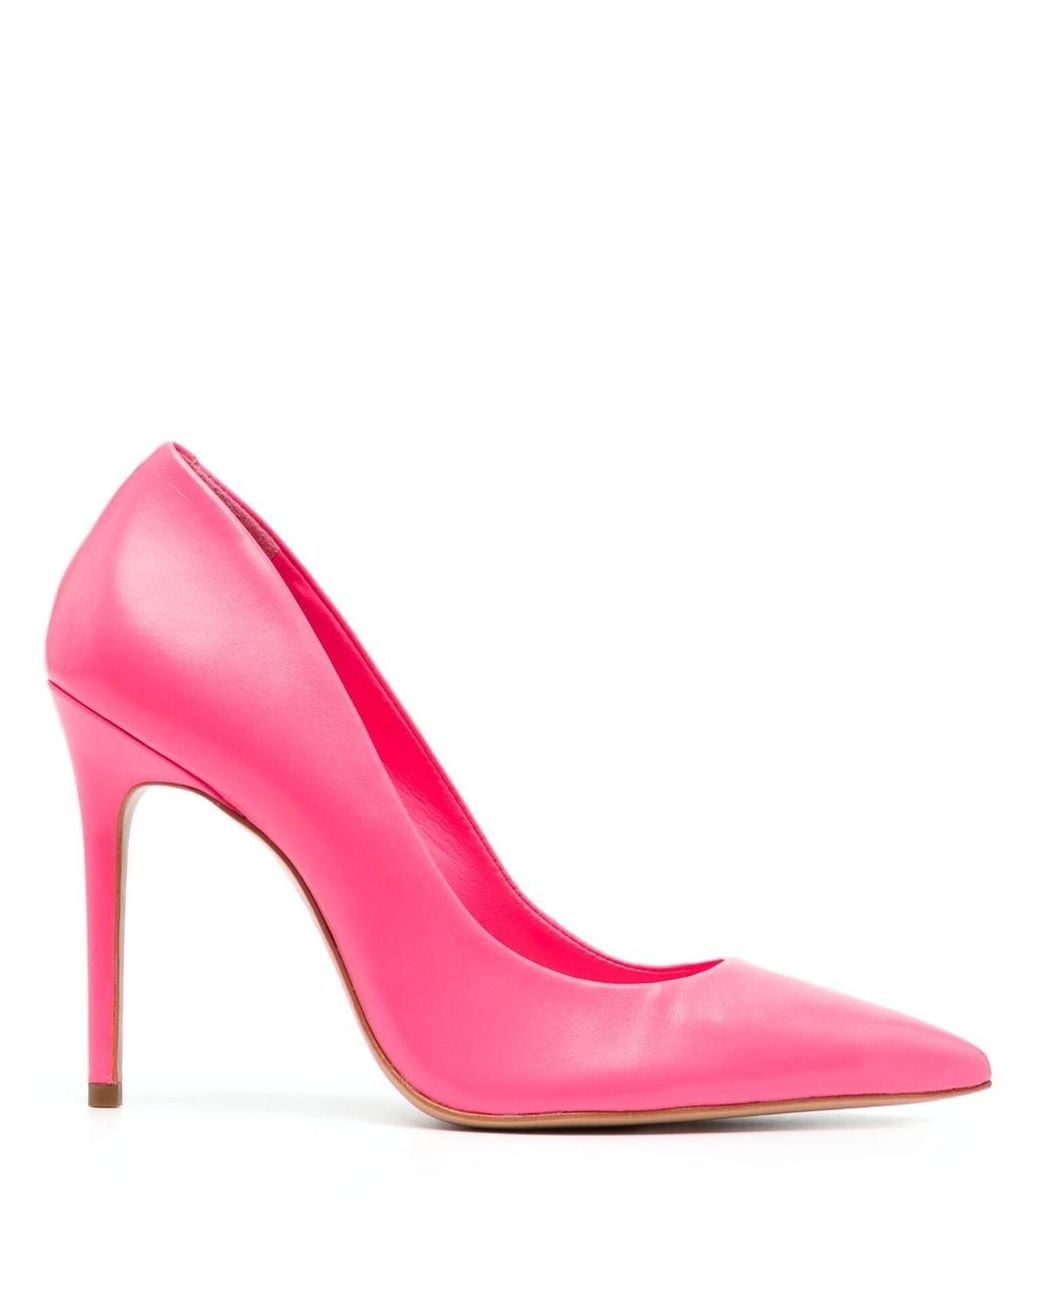 SCHUTZ SHOES Pointed-toe 110mm Leather Pumps in Pink | Lyst